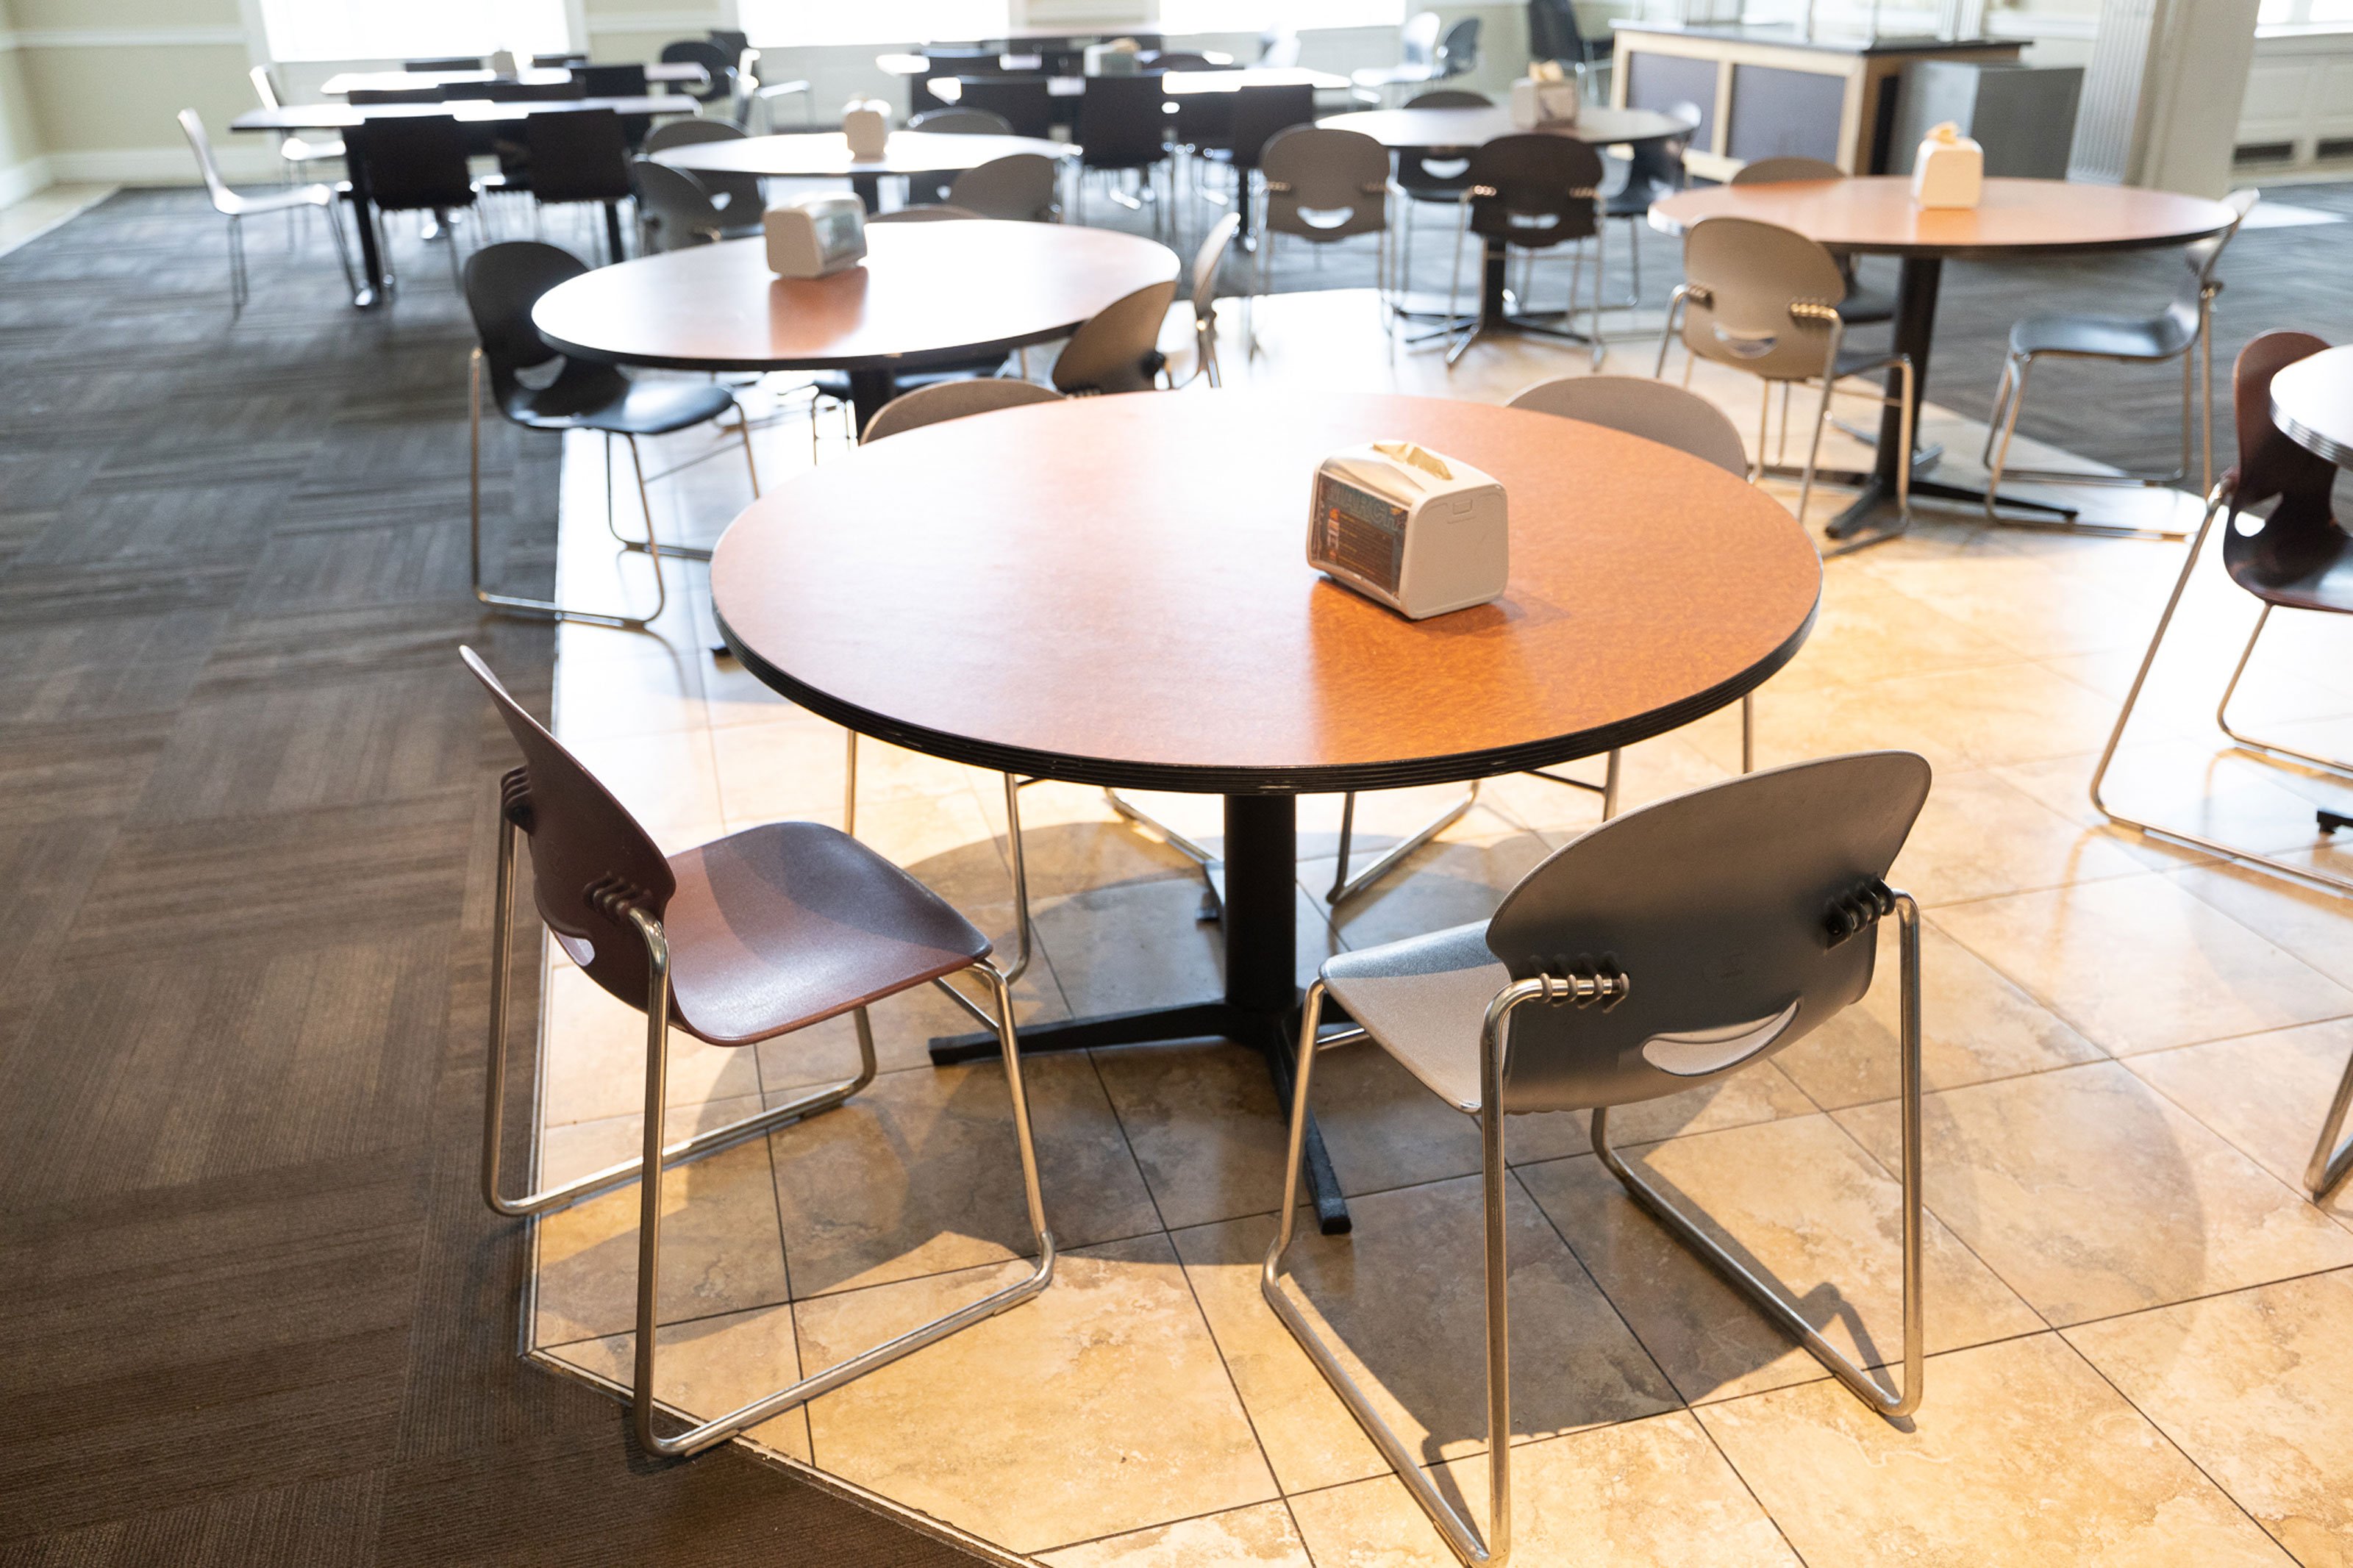 Circular tables surrounded by chairs inside the dining hall on Alumni Quad.